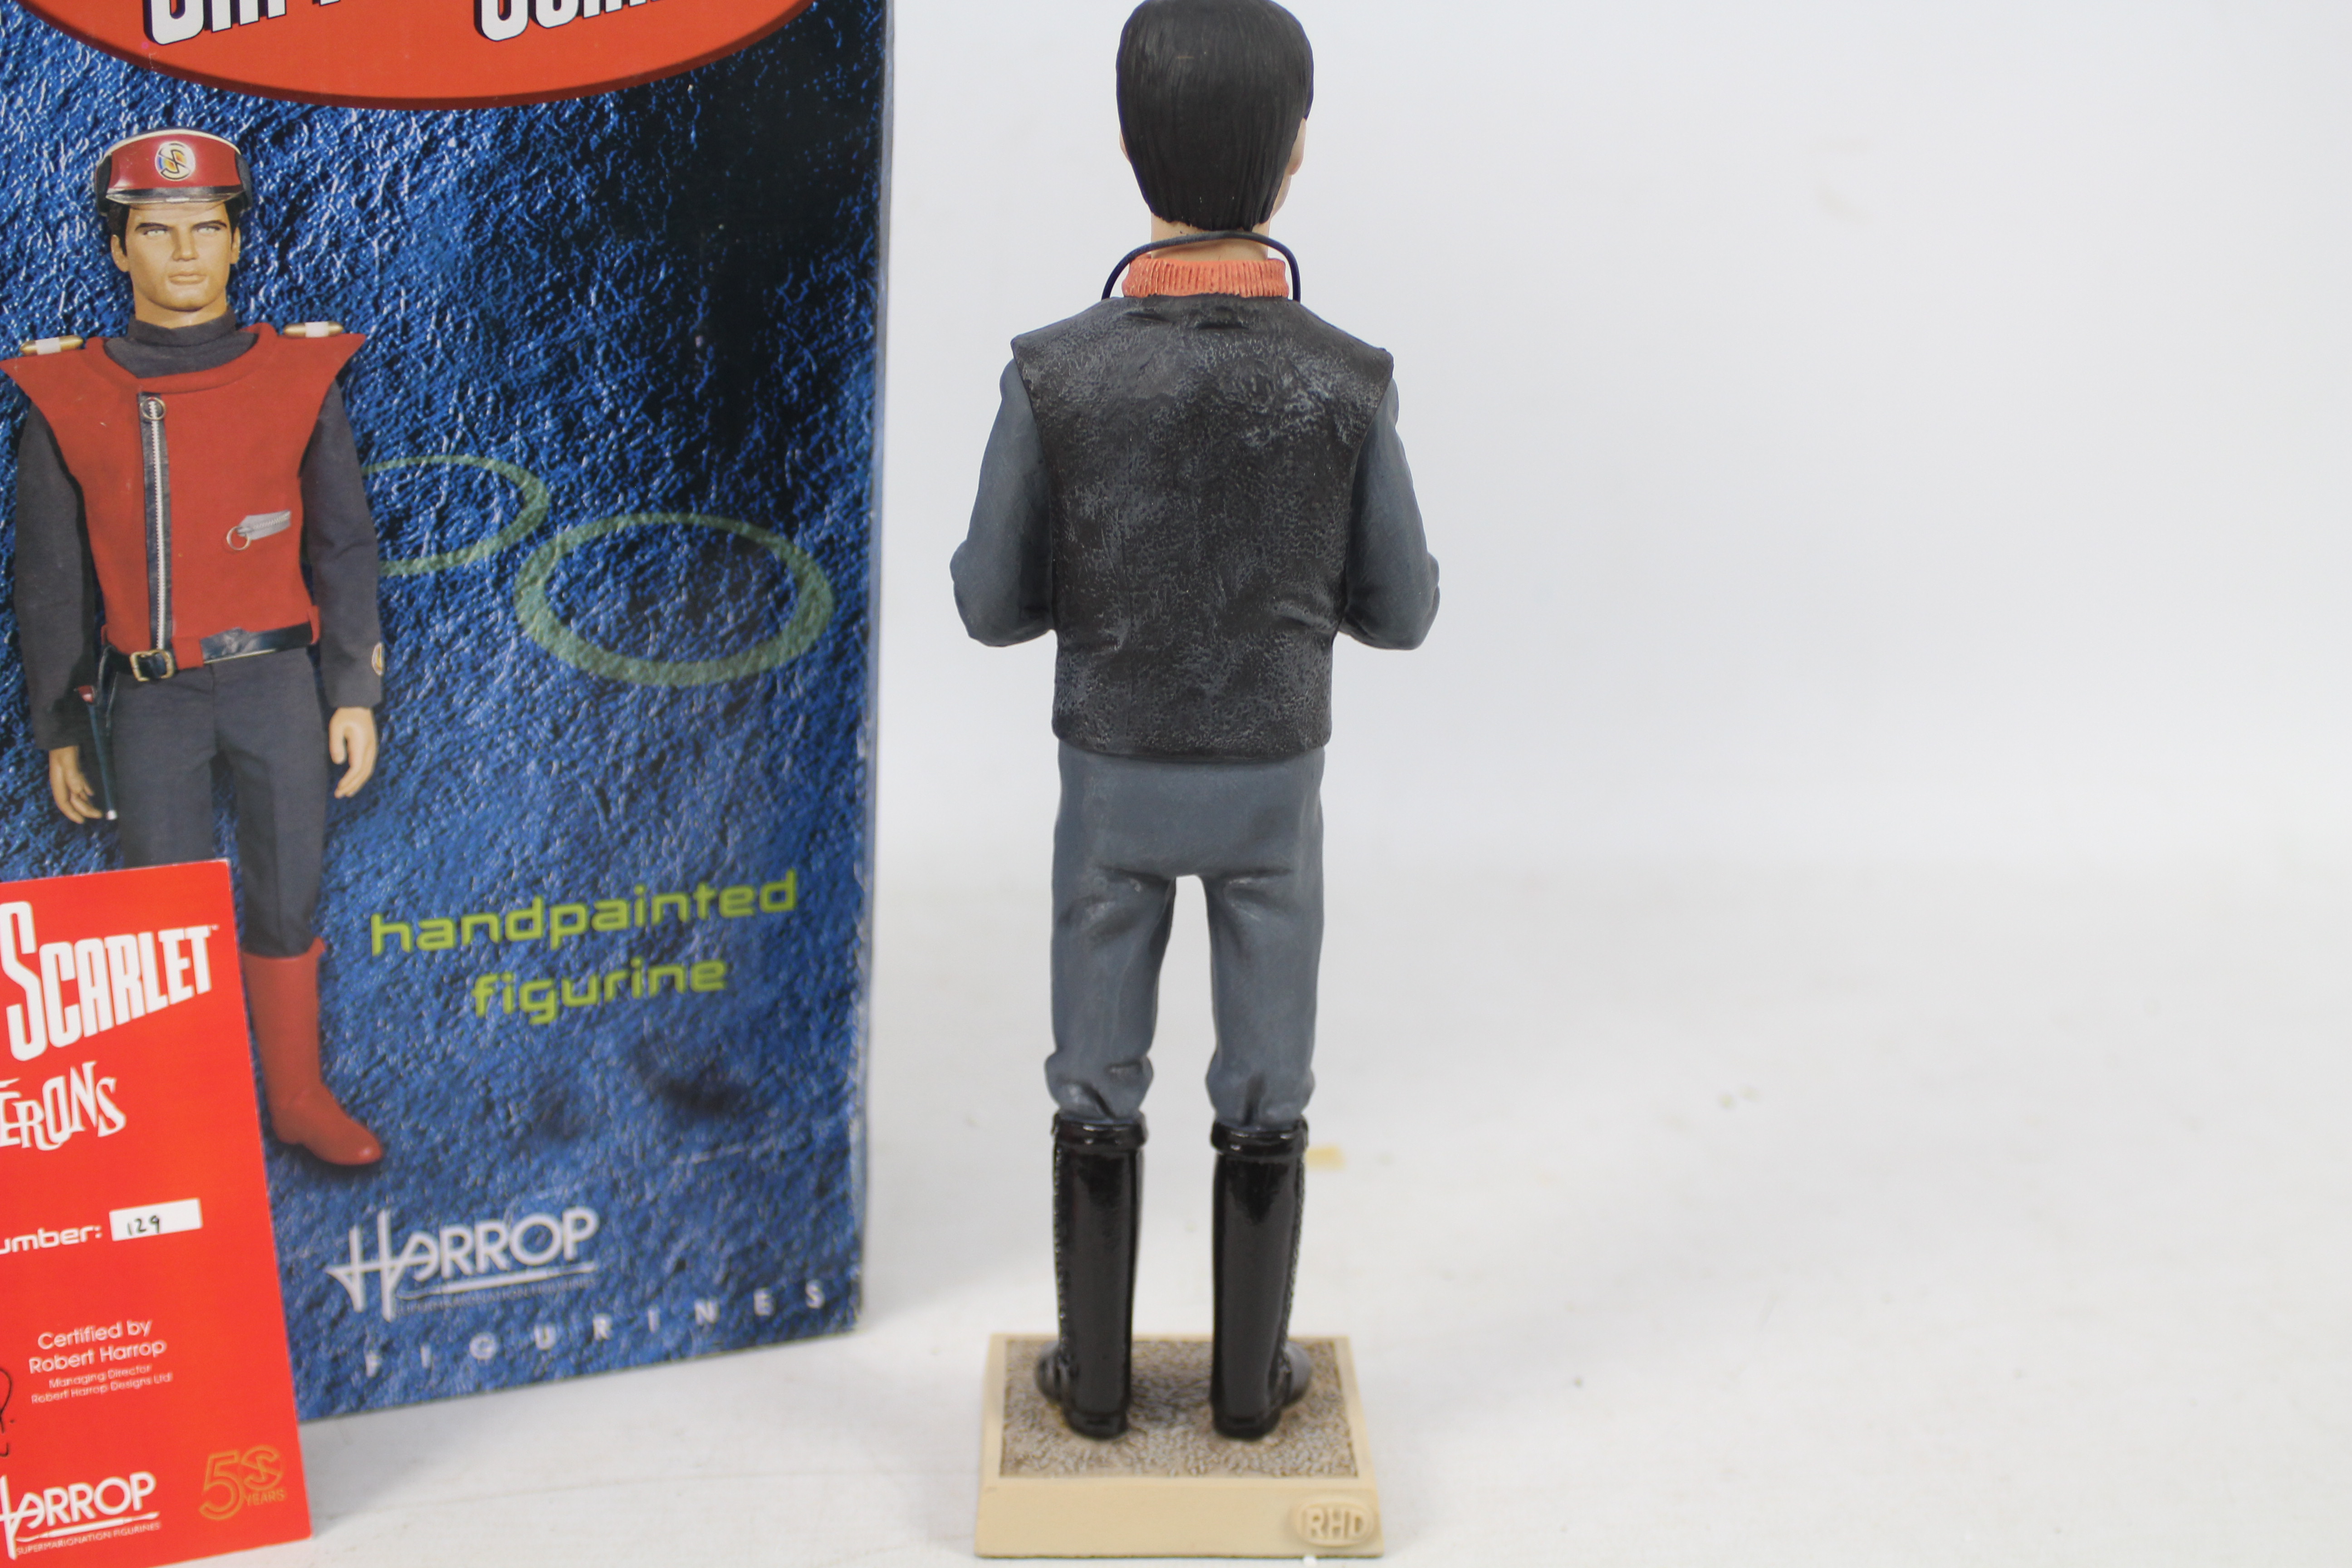 Captain Scarlet - A limited edition Robert Harrop figure of Captain Black from the Gerry Anderson - Image 3 of 4